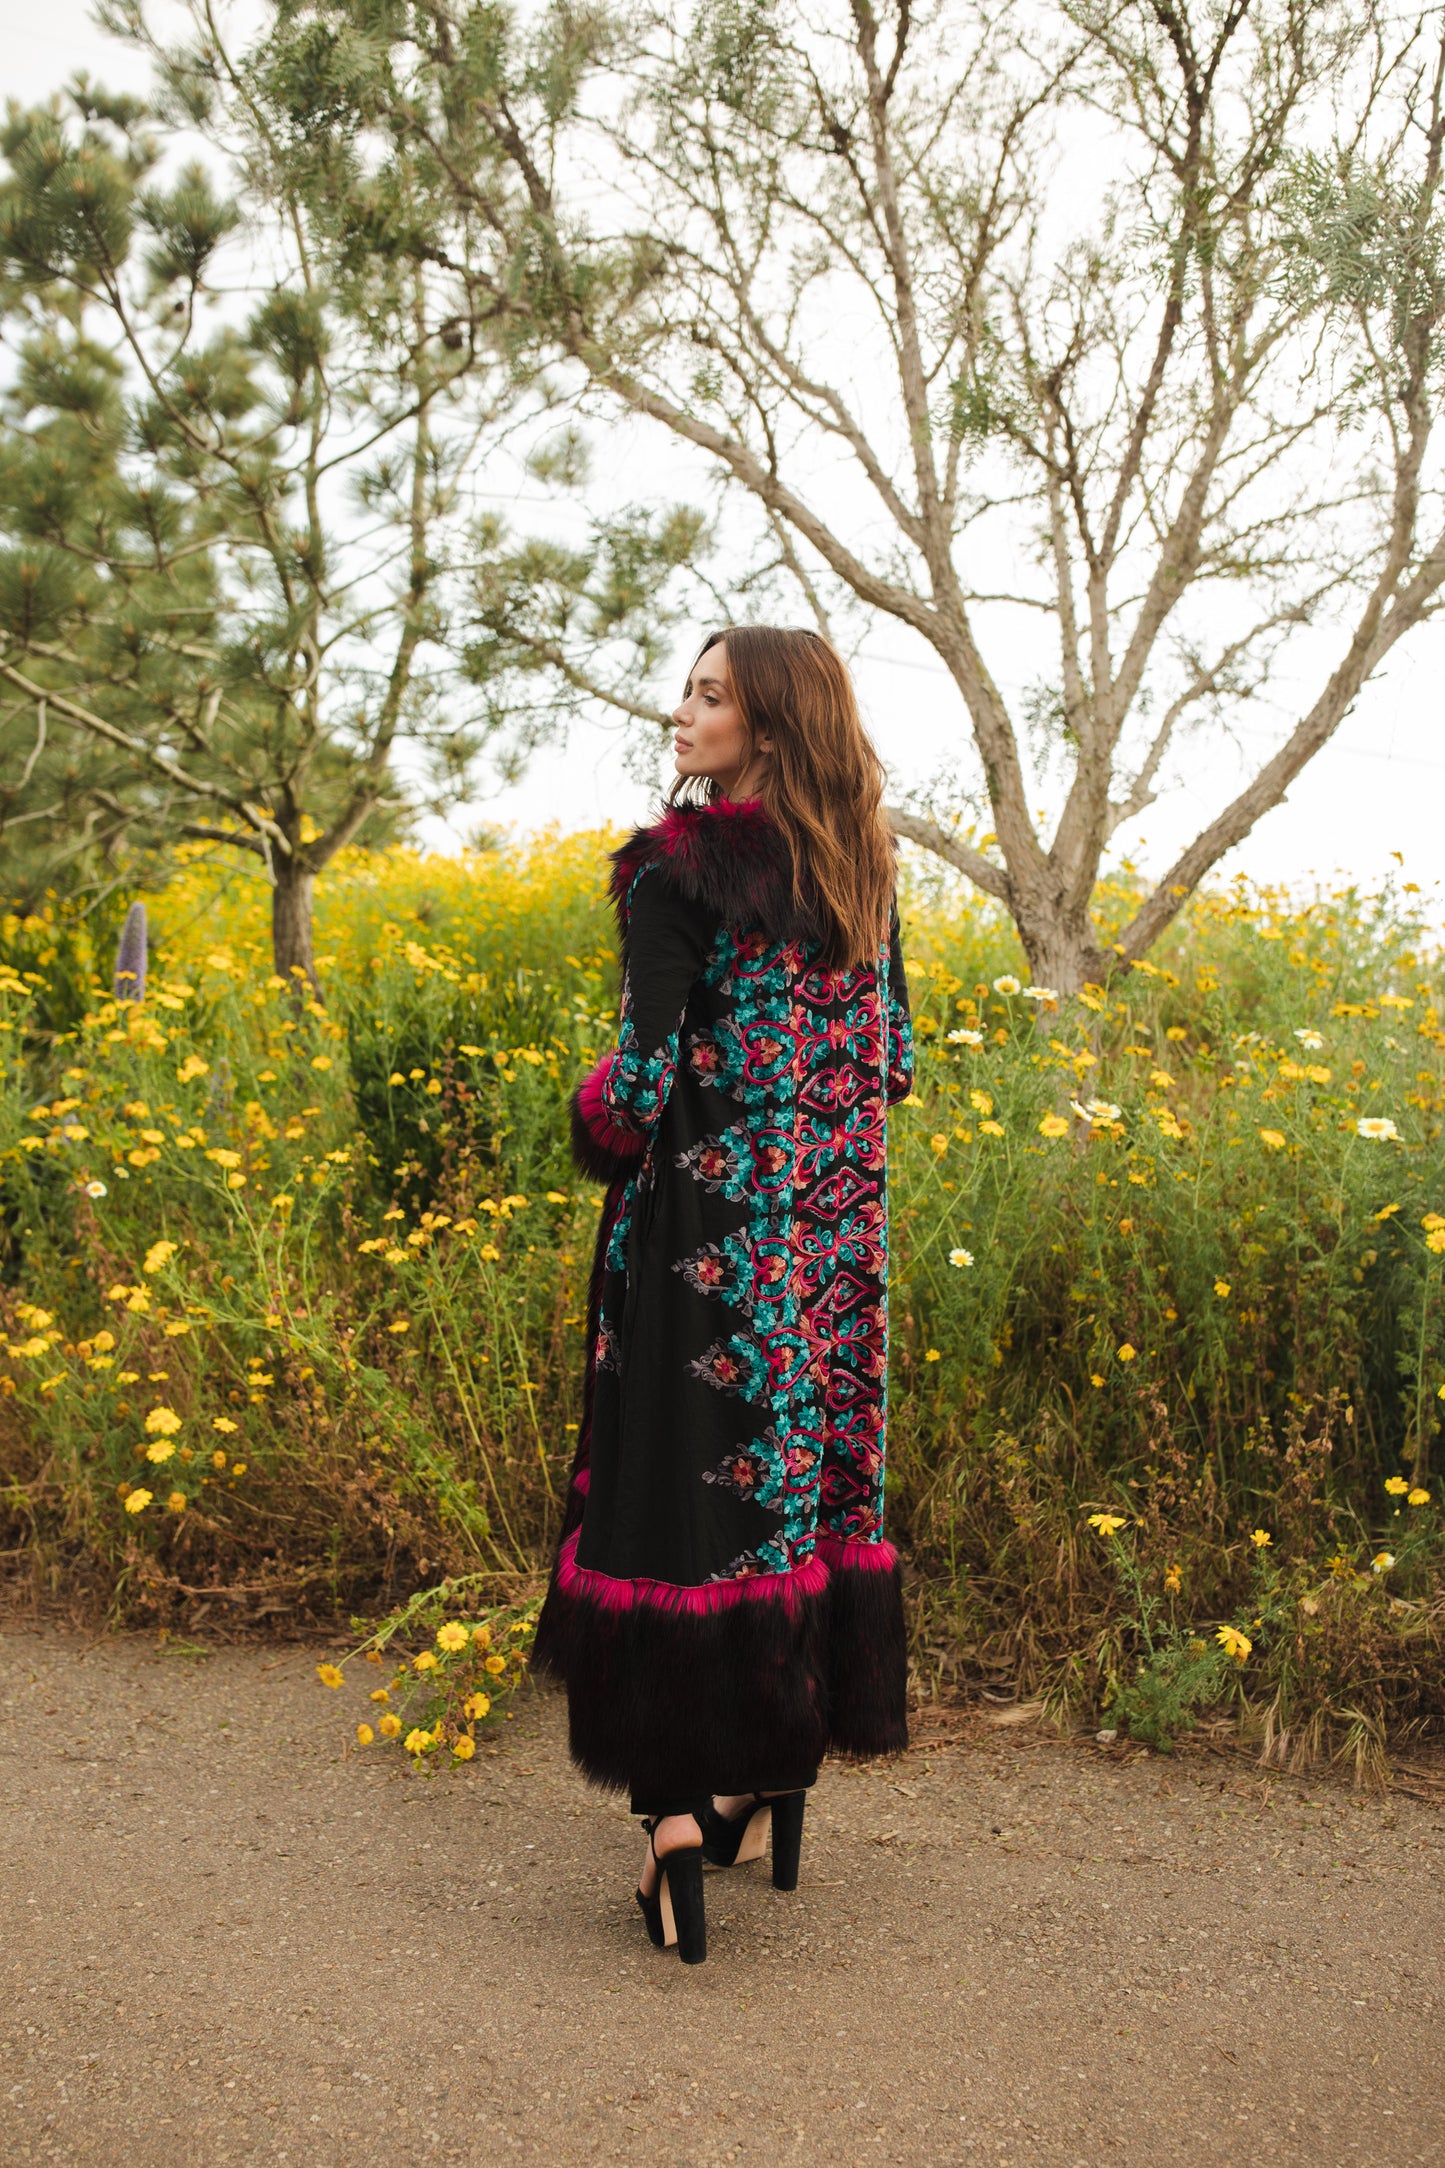 jennafer grace penny deluxe kahlo embroidered faux fur jacket hot pink fuchsia and black faux fur on black fabric with symmetrical floral embroidery opera coat 1960s 1970s Almost Famous penny lane jacket boho bohemian hippie romantic whimsical unisex handmade in California USA